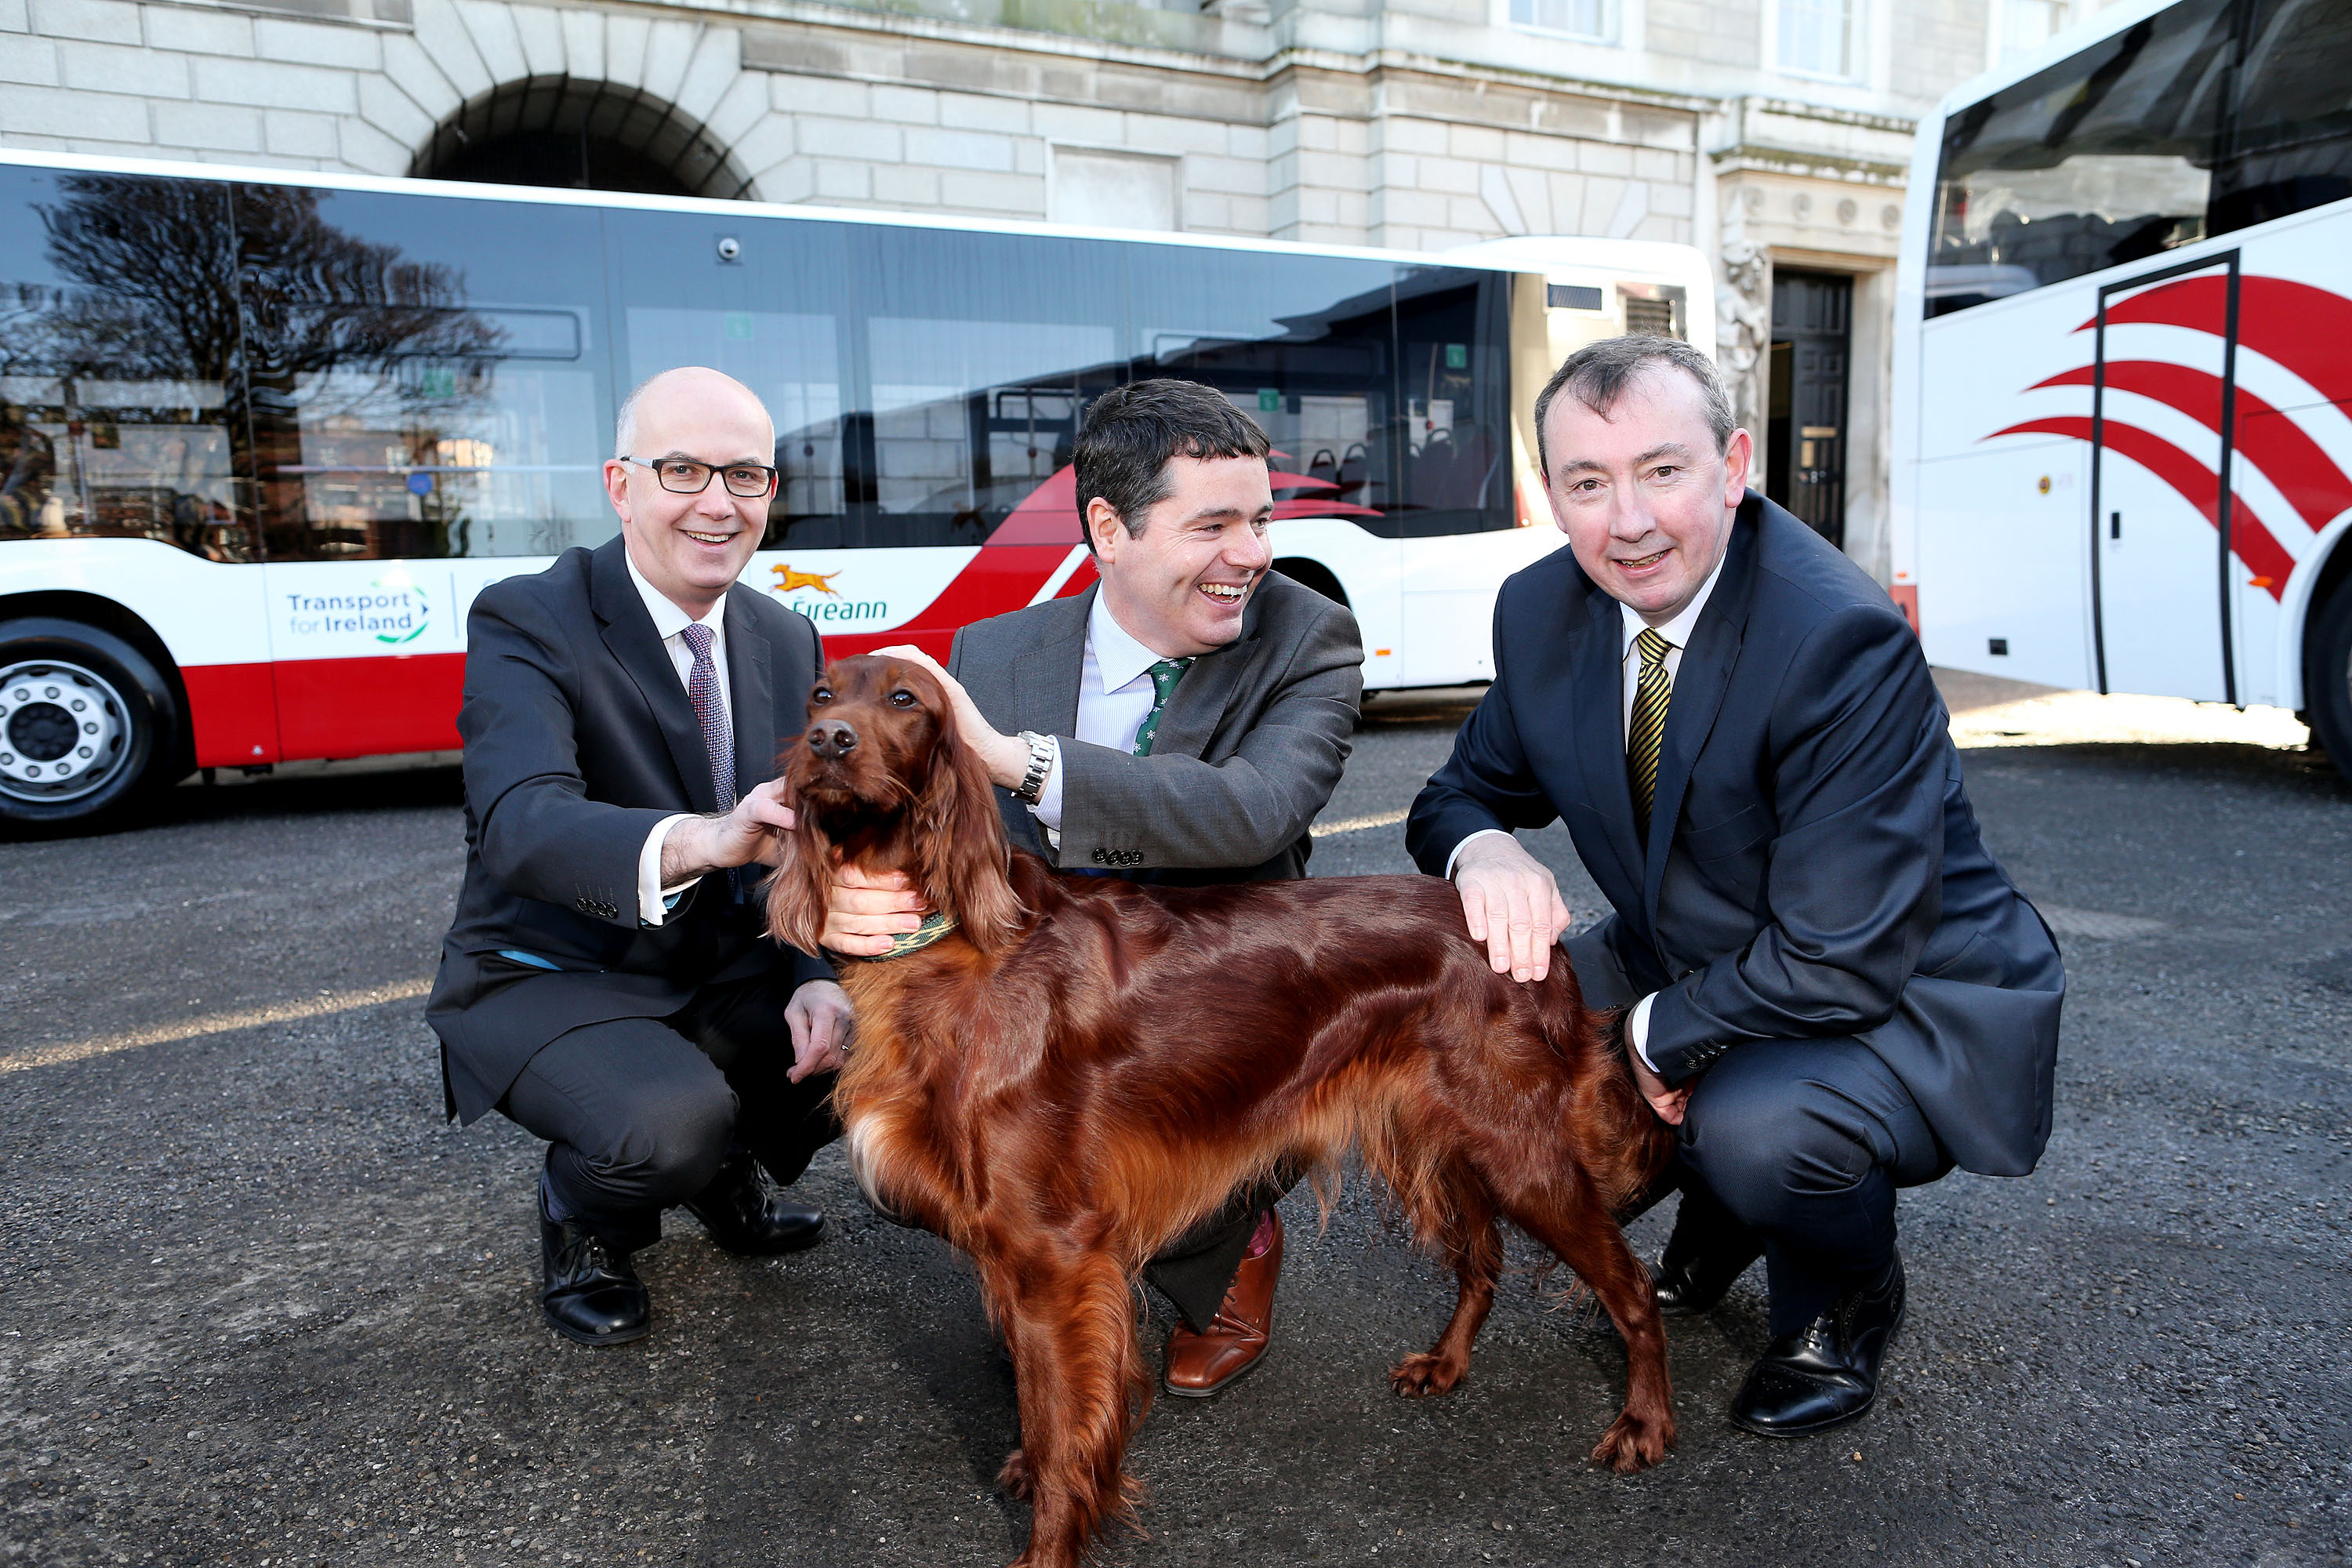 Pictured at the announcement of new vehicles for Bus Éireann are (L-R): Tim Gaston, National Transport Authority, Minister Paschal Donohoe and Martin Nolan, Bus Éireann – and Legend the dog.